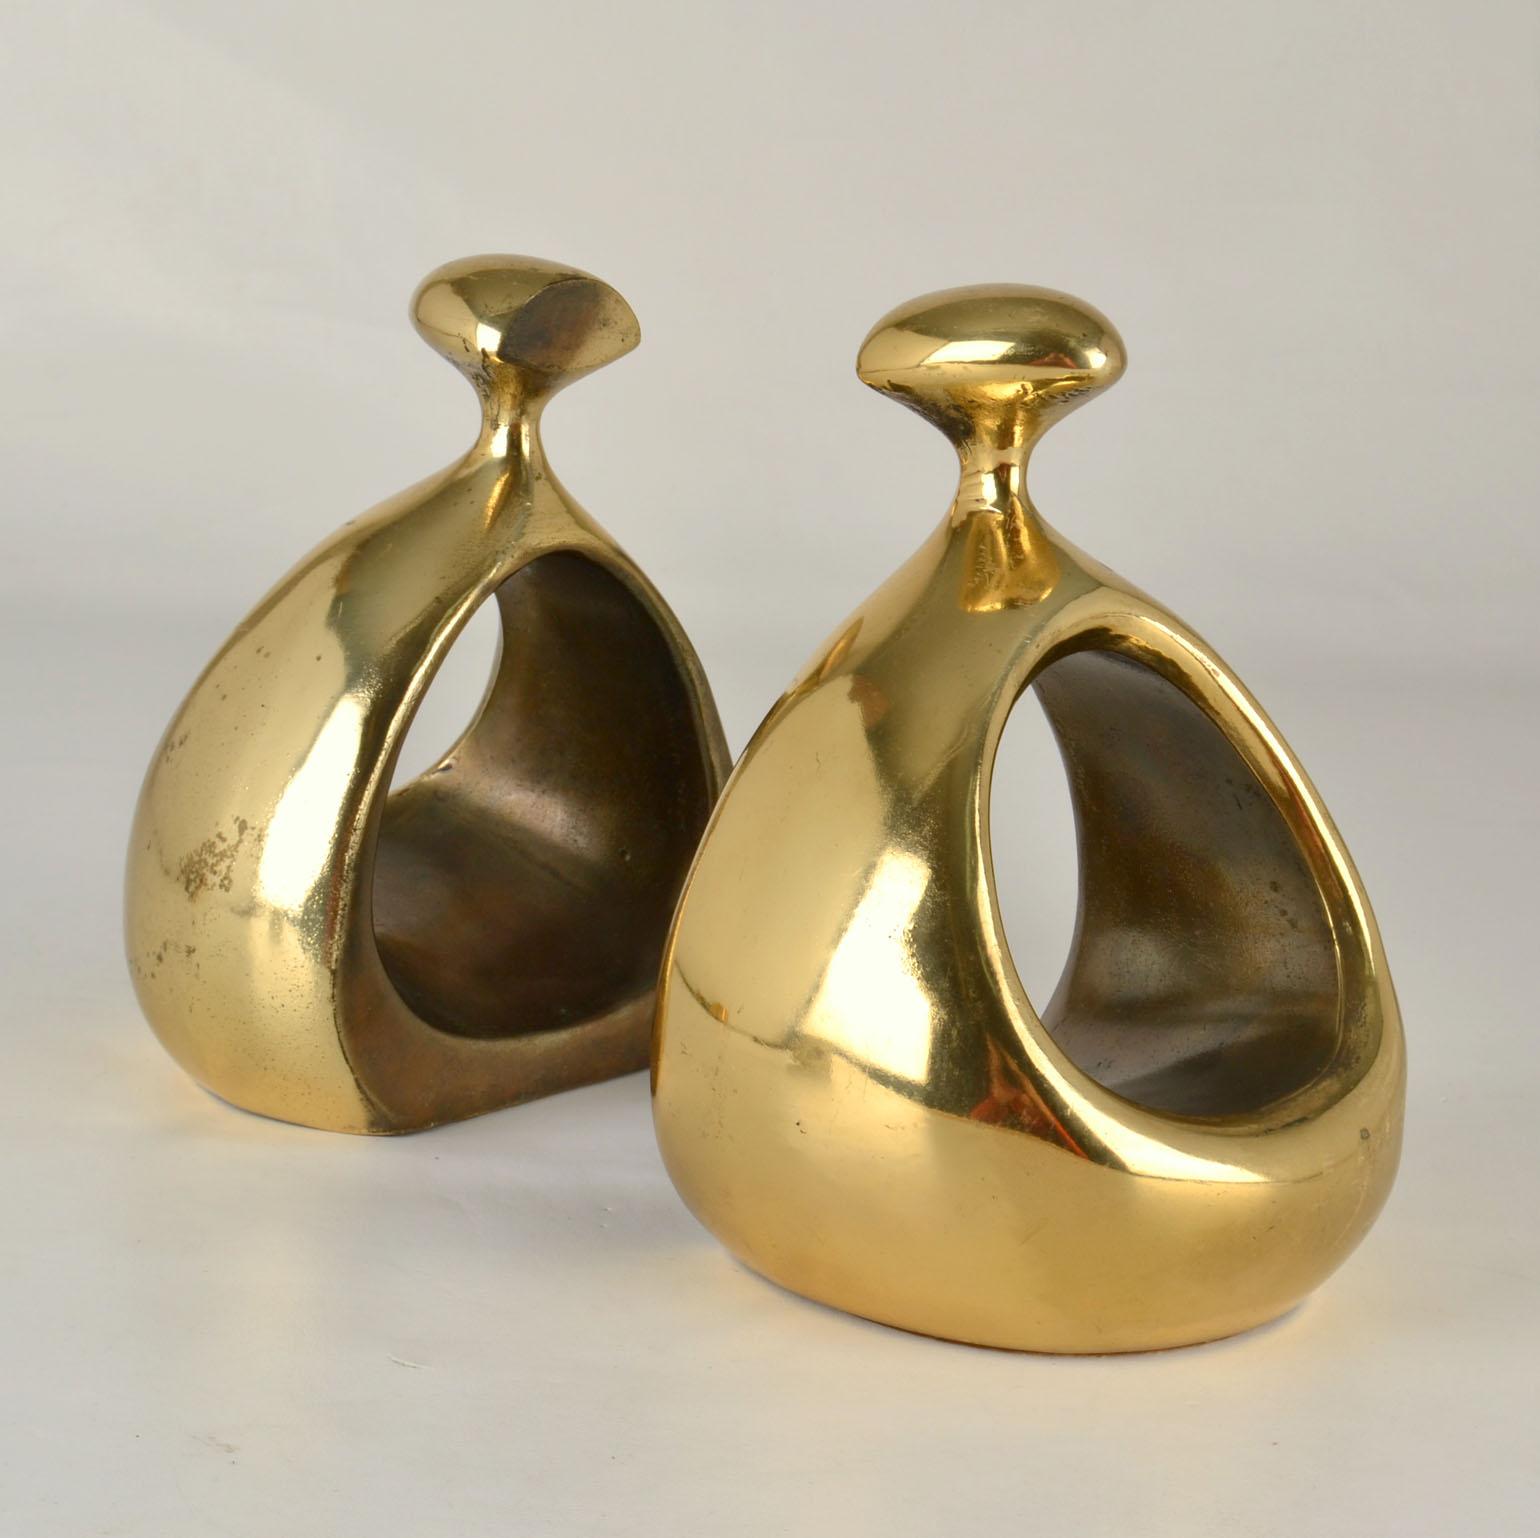 Pair of rounded sculptural brass bookends in organic form by Ben Seibel for Jenfred Ware, distributed by Raymor, USA, 1950's. Cast metal with shiny brass finish and partly a dark patina to emphasis on the depth of the orb form.

